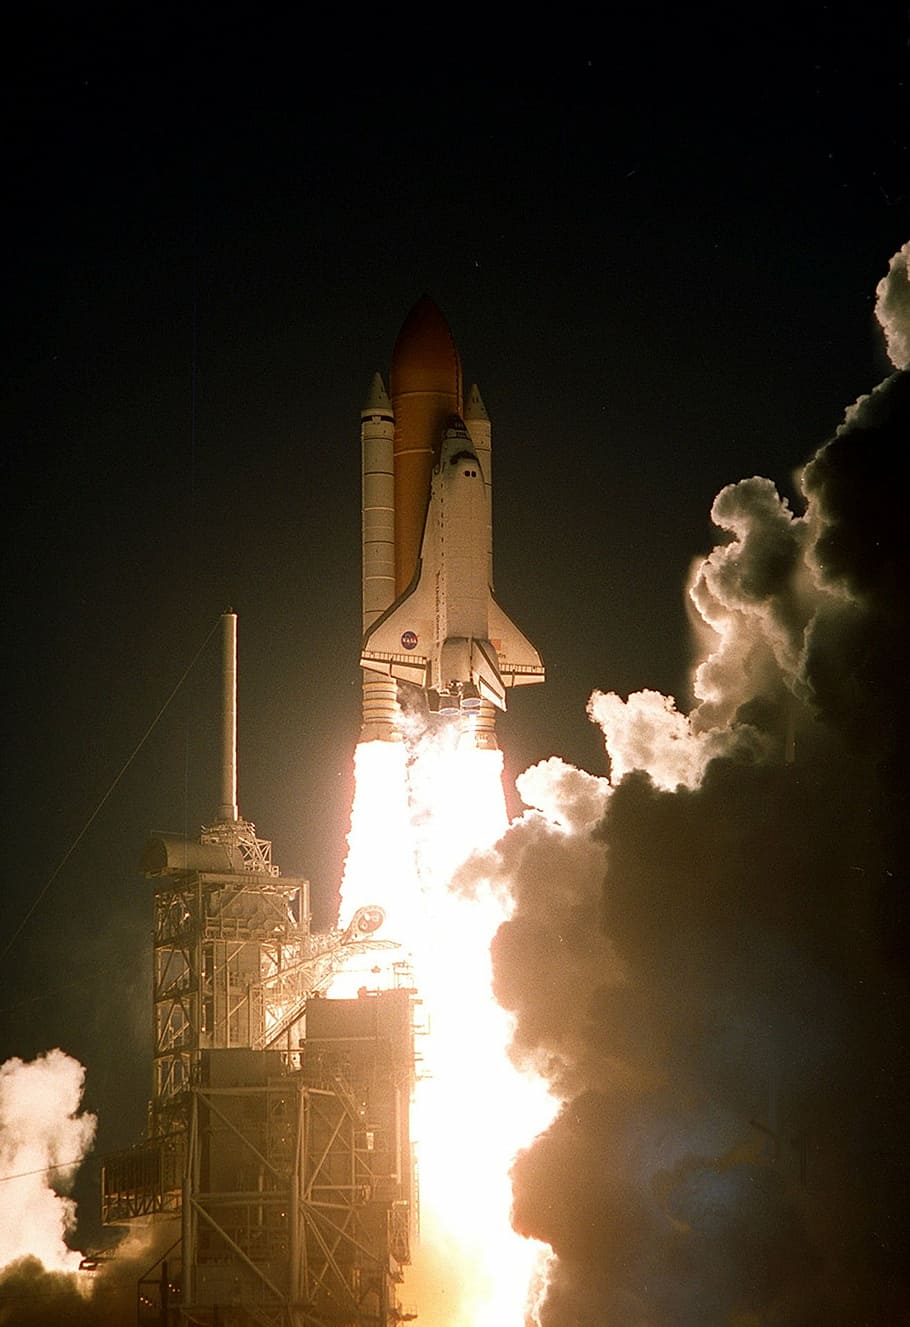 space shuttle atlantis, liftoff, launch, night, launch pad, rocket boosters, exploration, mission, flight, cape canaveral